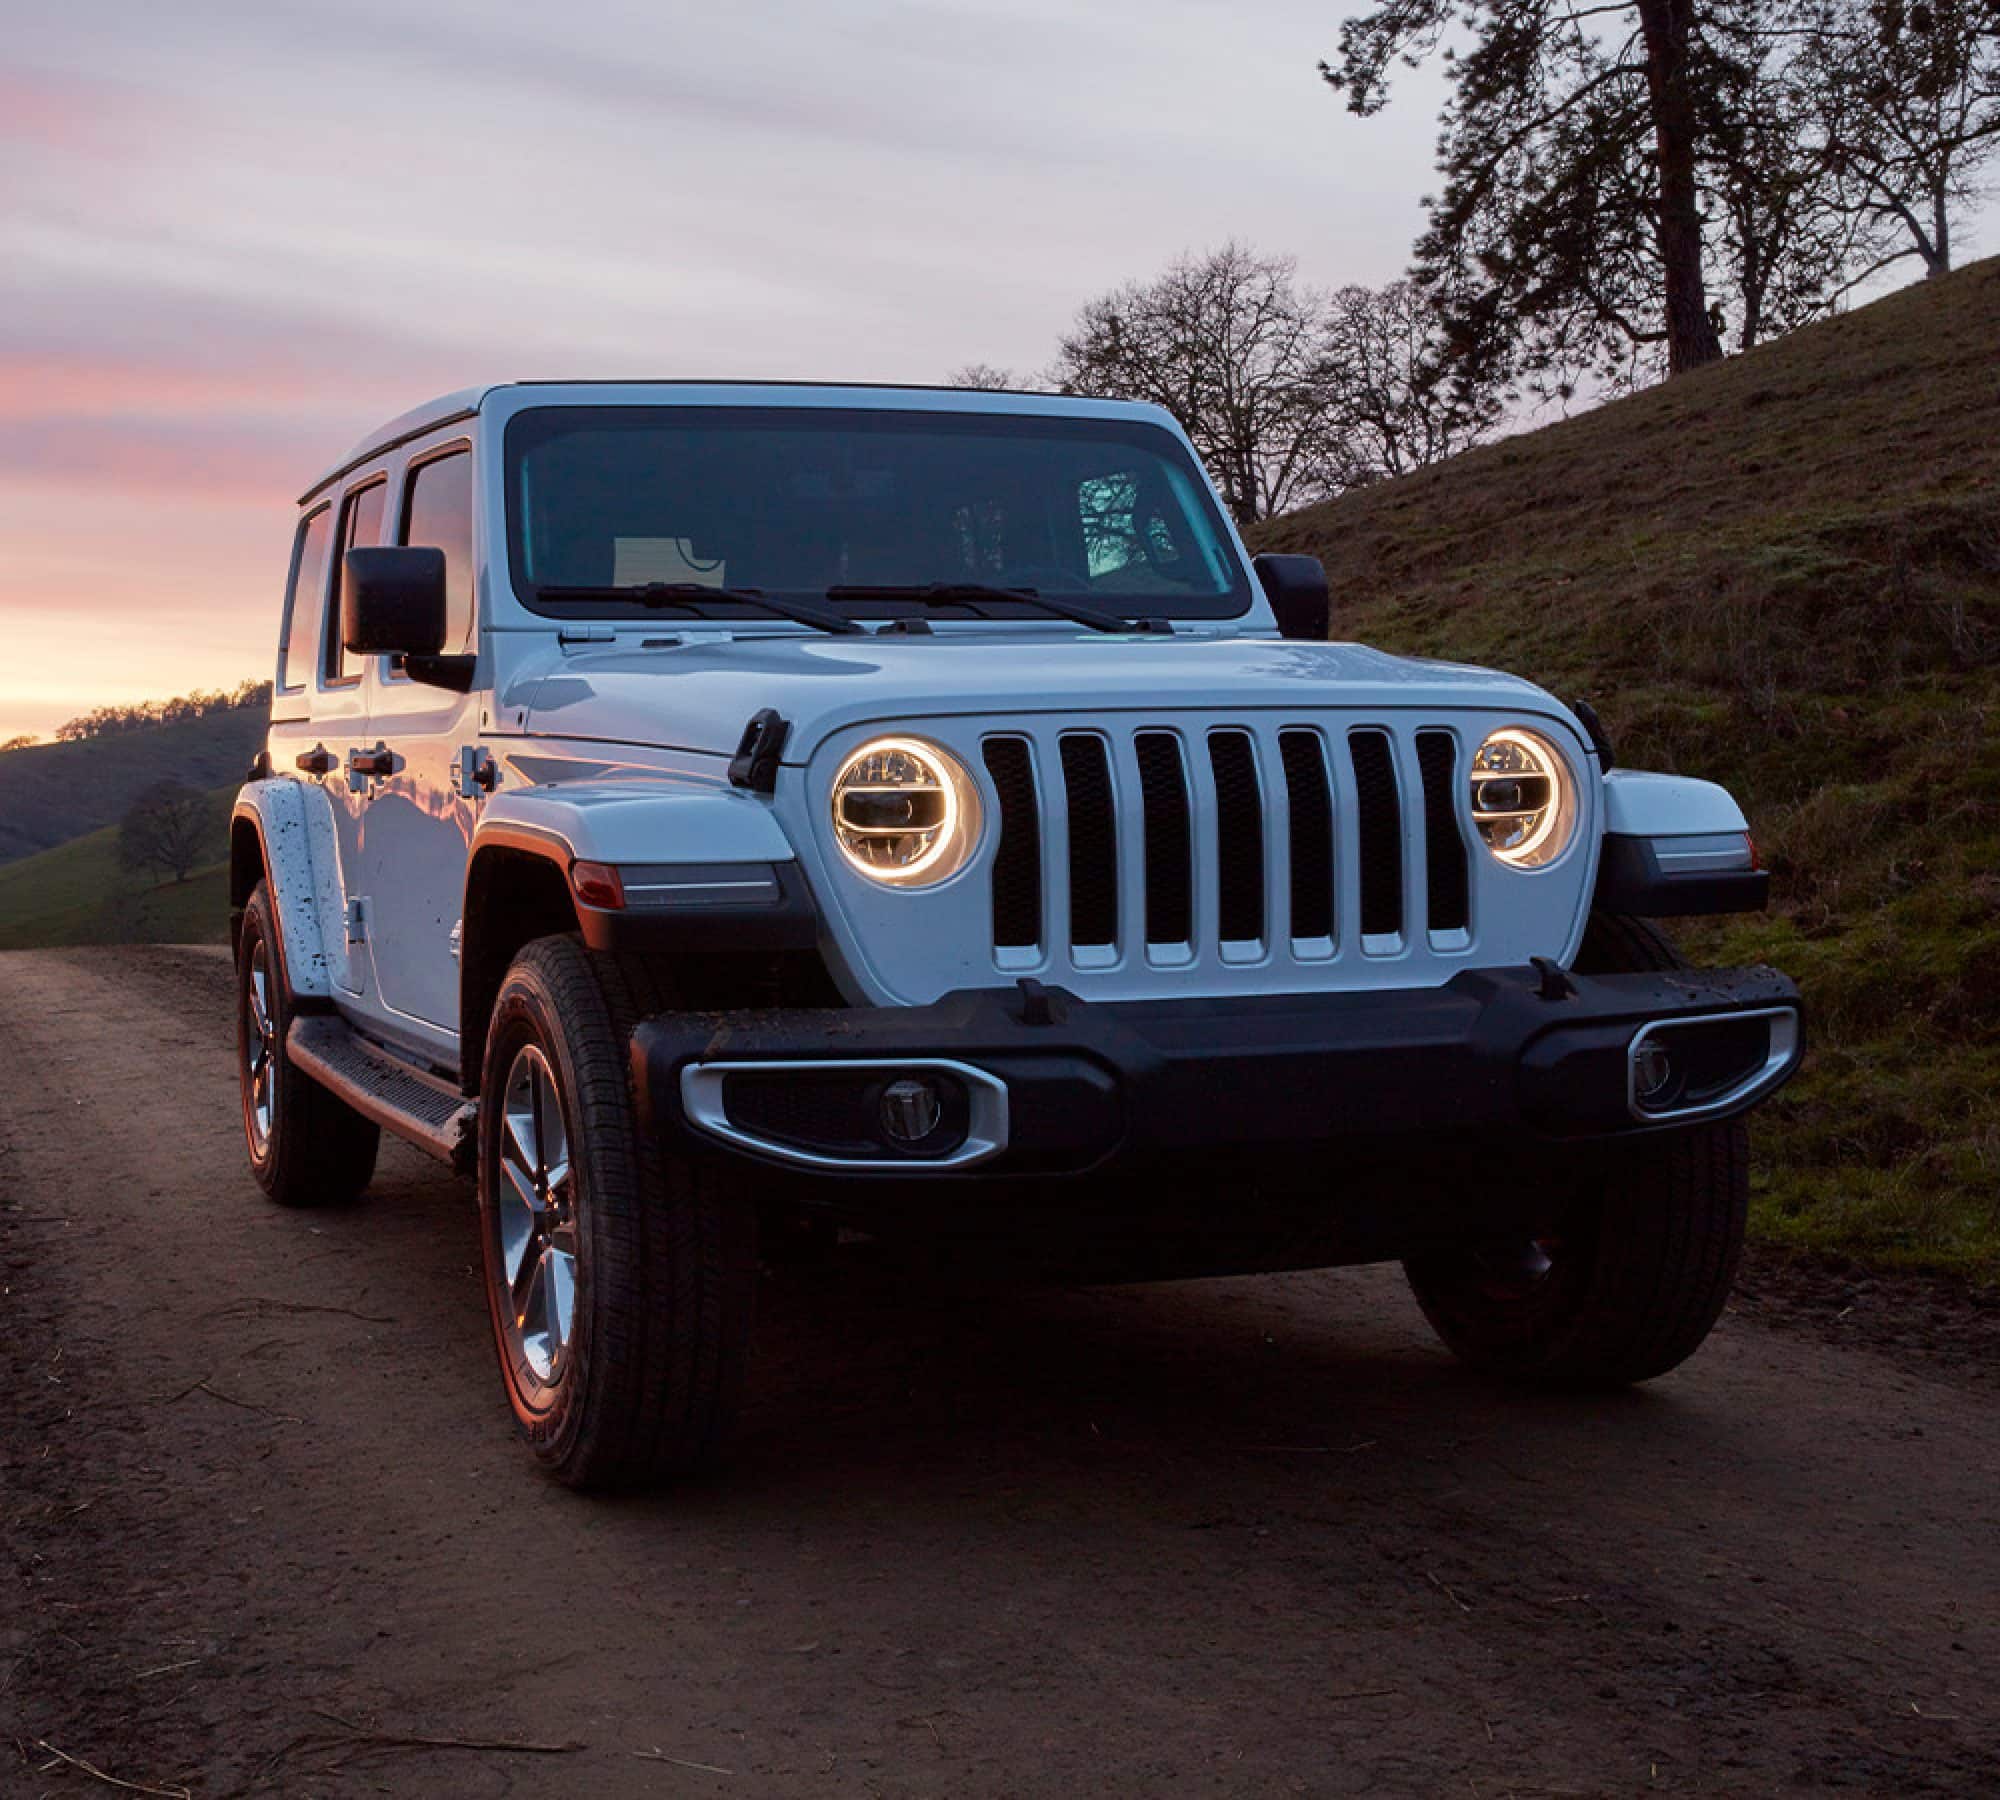 Trim Levels of the 2020 Jeep Wrangler